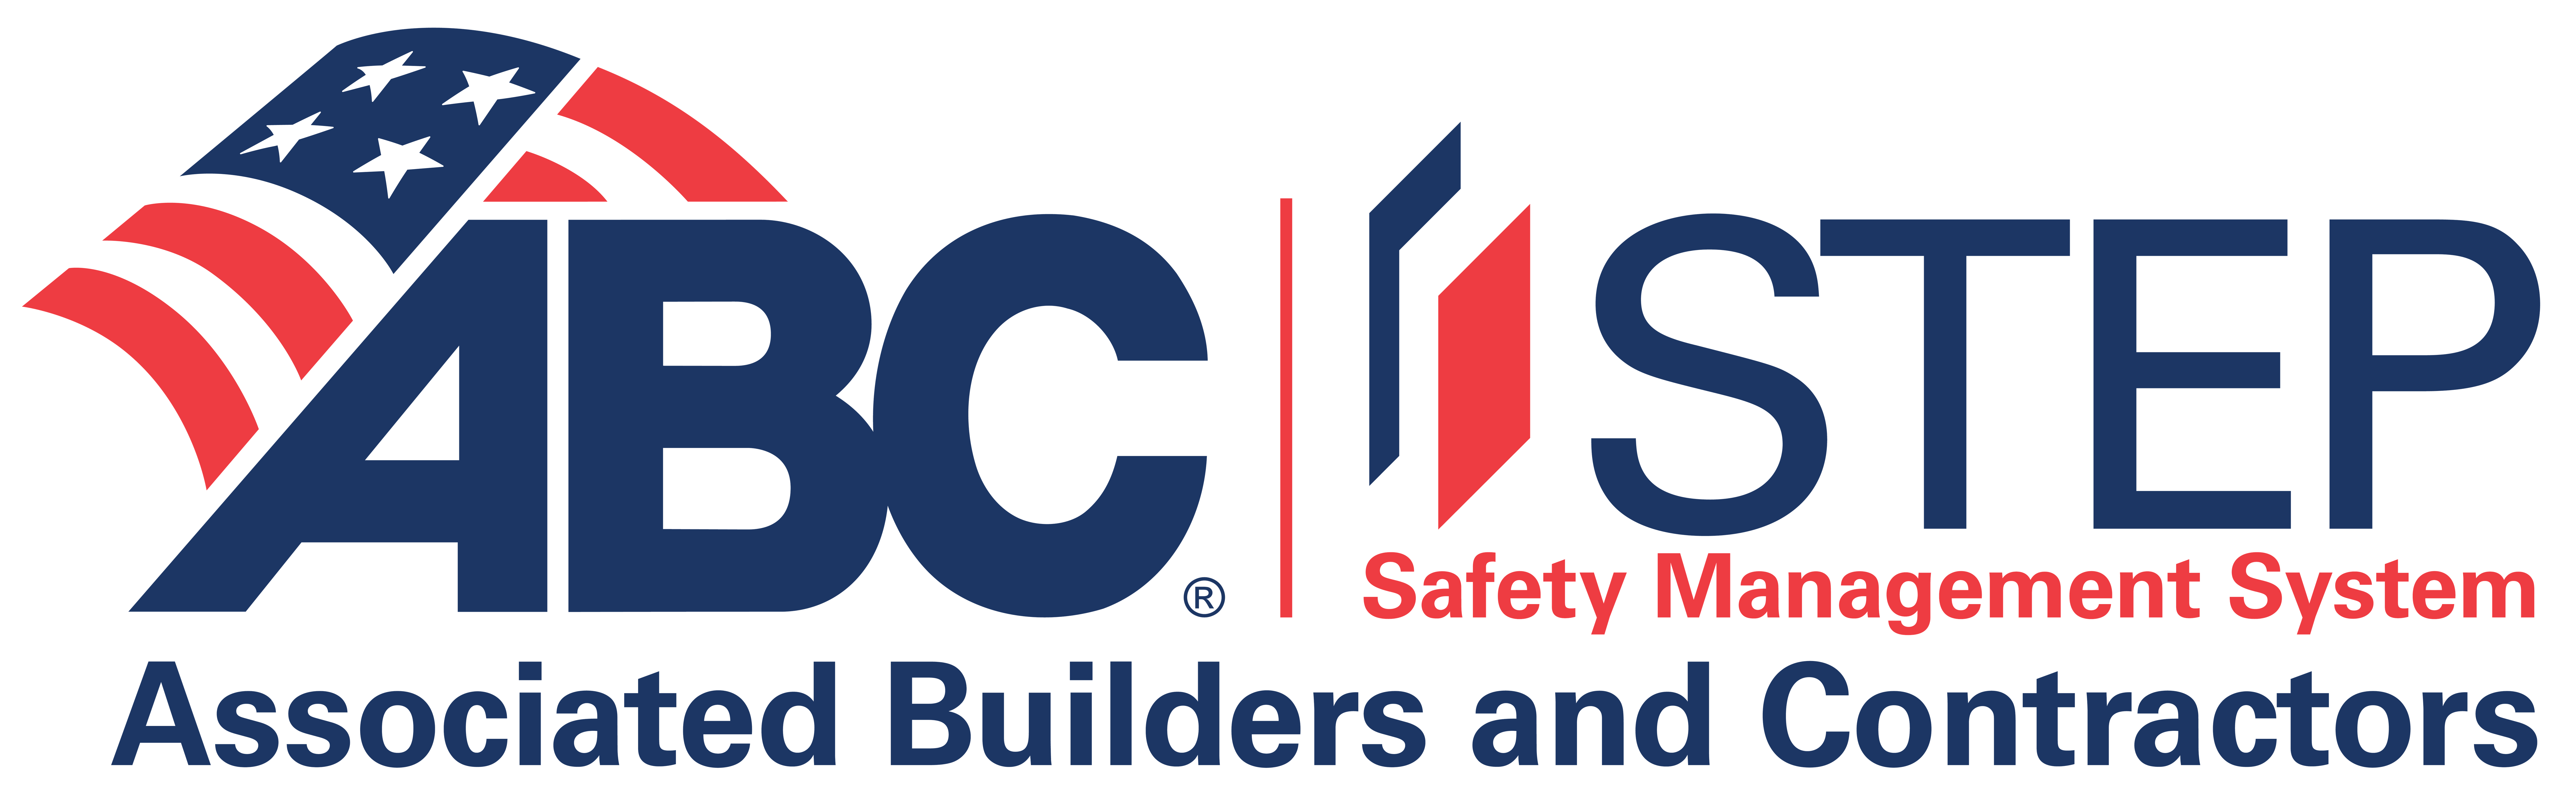 Associated Builders and Contractors Safety Management System (STEP)